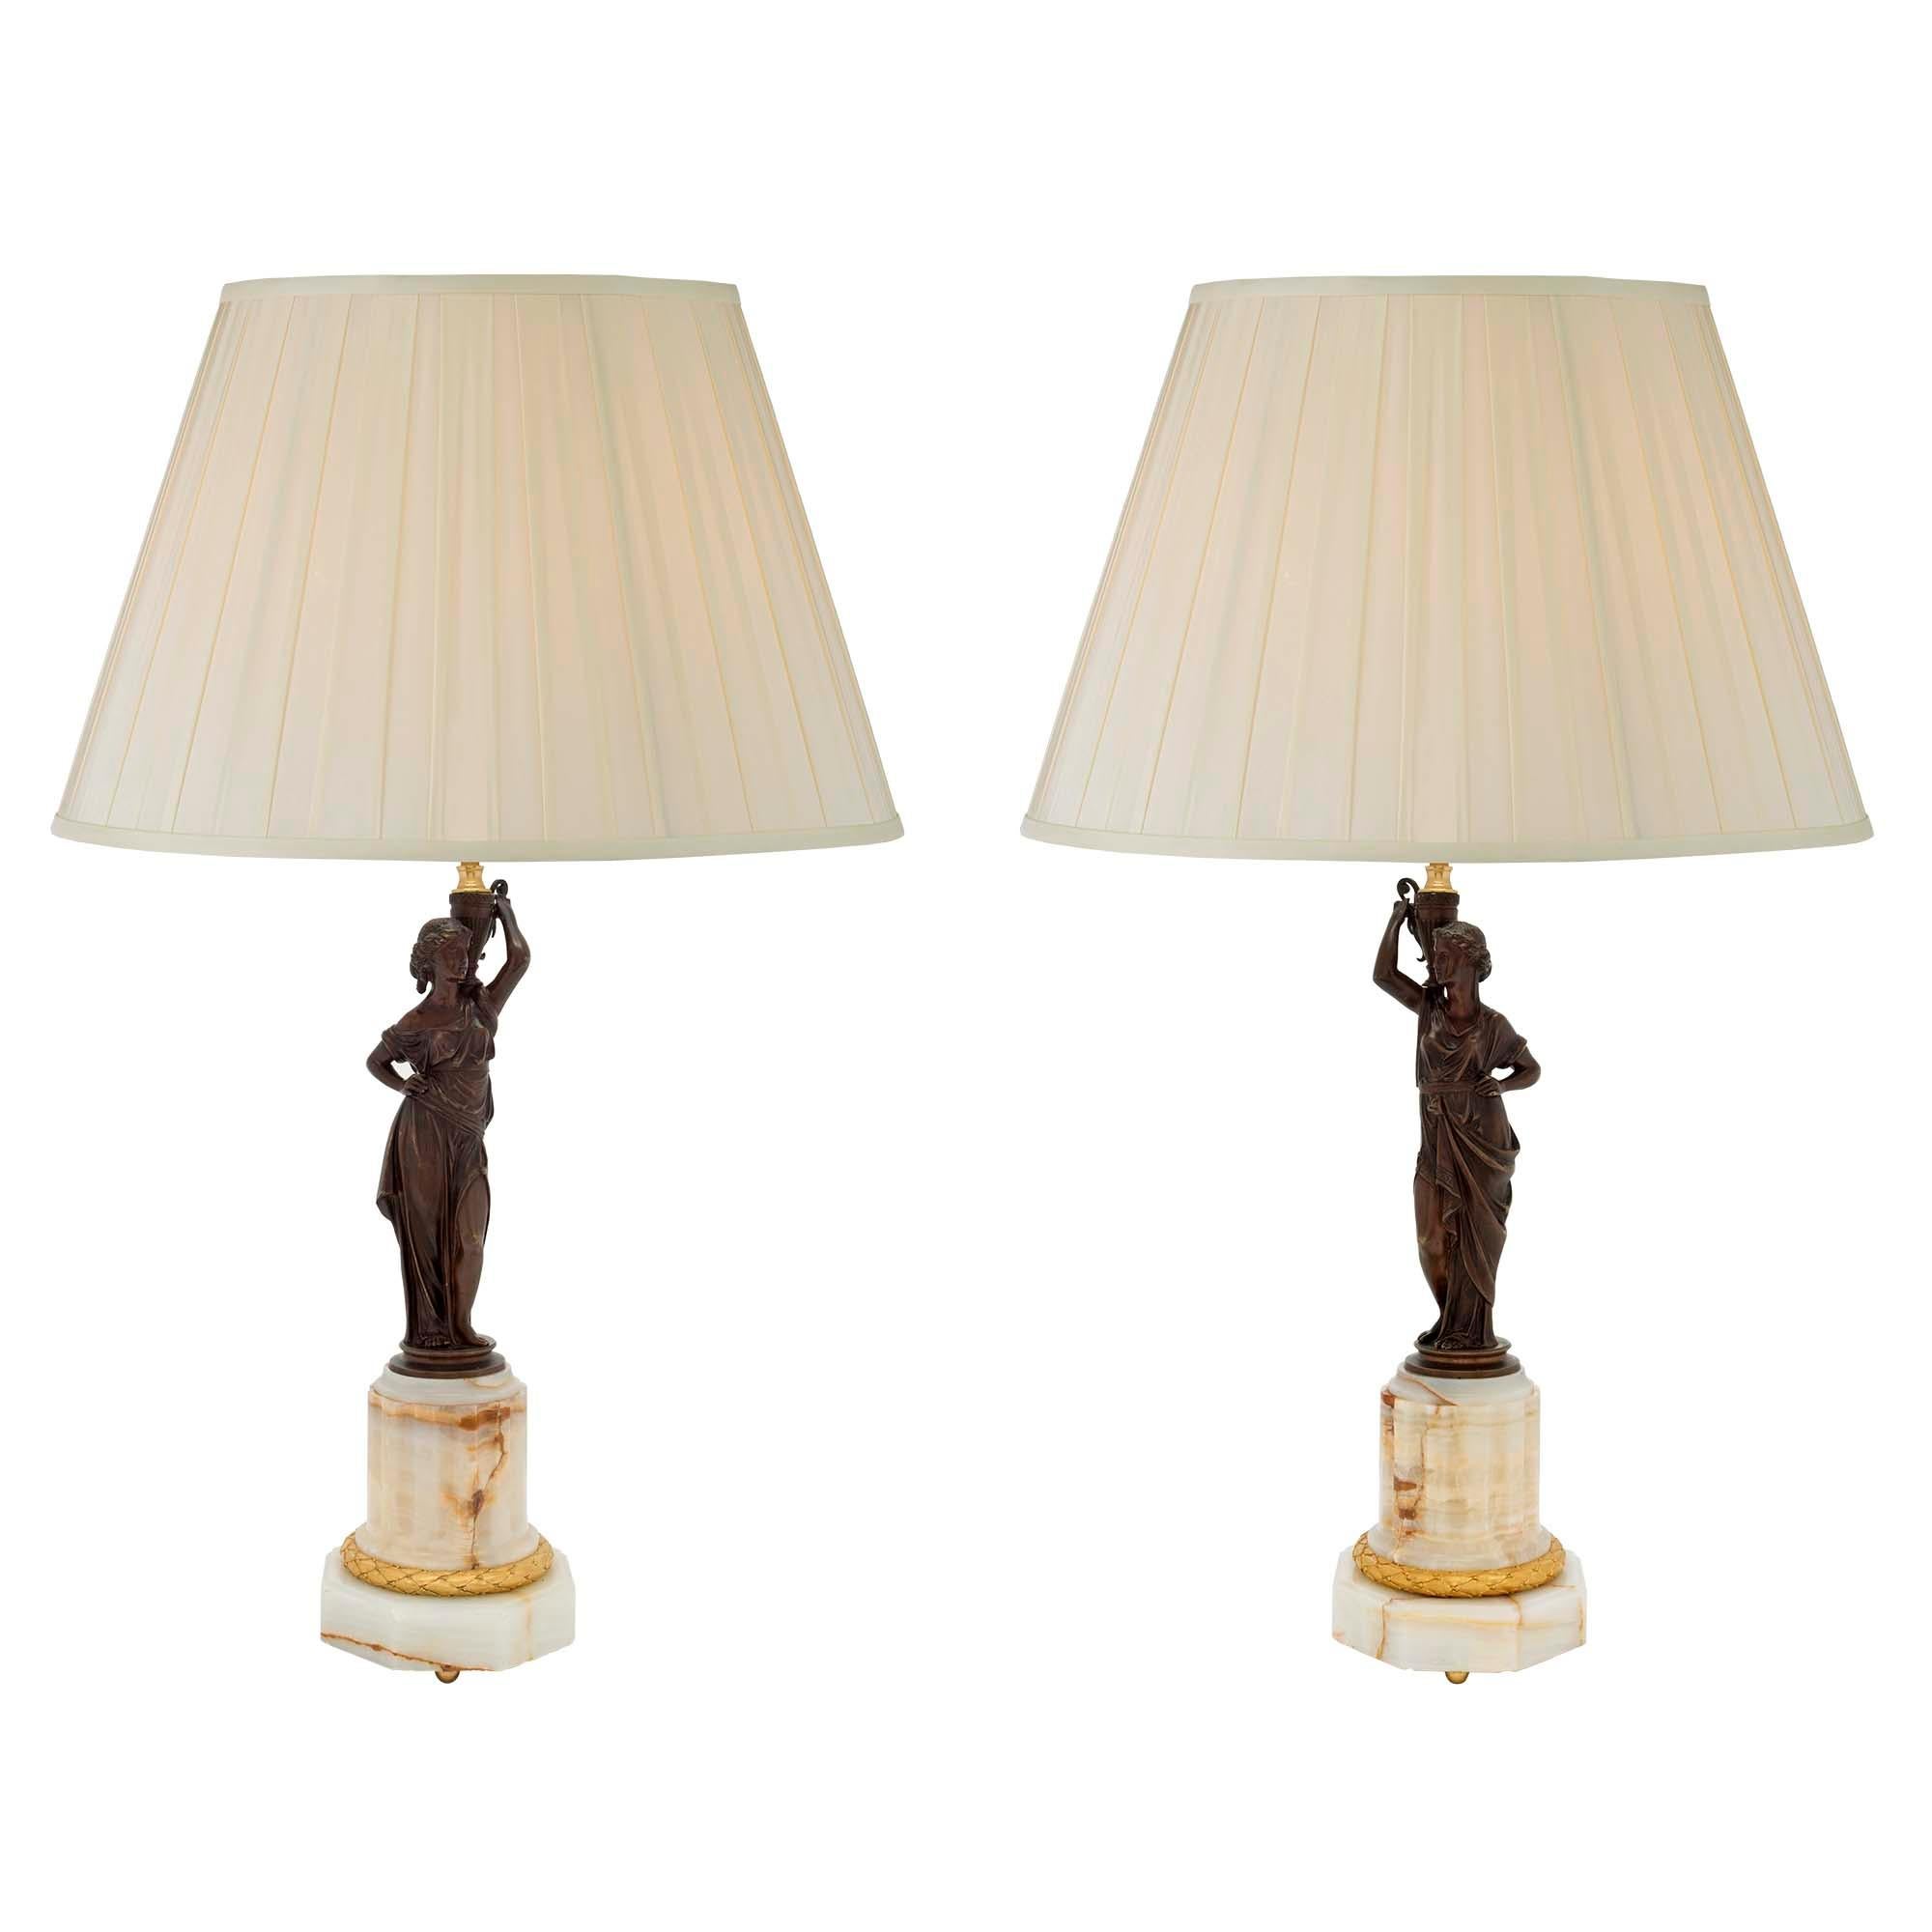 An extremely elegant true pair of French 19th century Neo-Classical st. onyx, ormolu and patinated bronze lamps. Each lamp is raised by an octagonal onyx base with ormolu ball feet, below a richly chased ormolu band and a circular fluted support. At